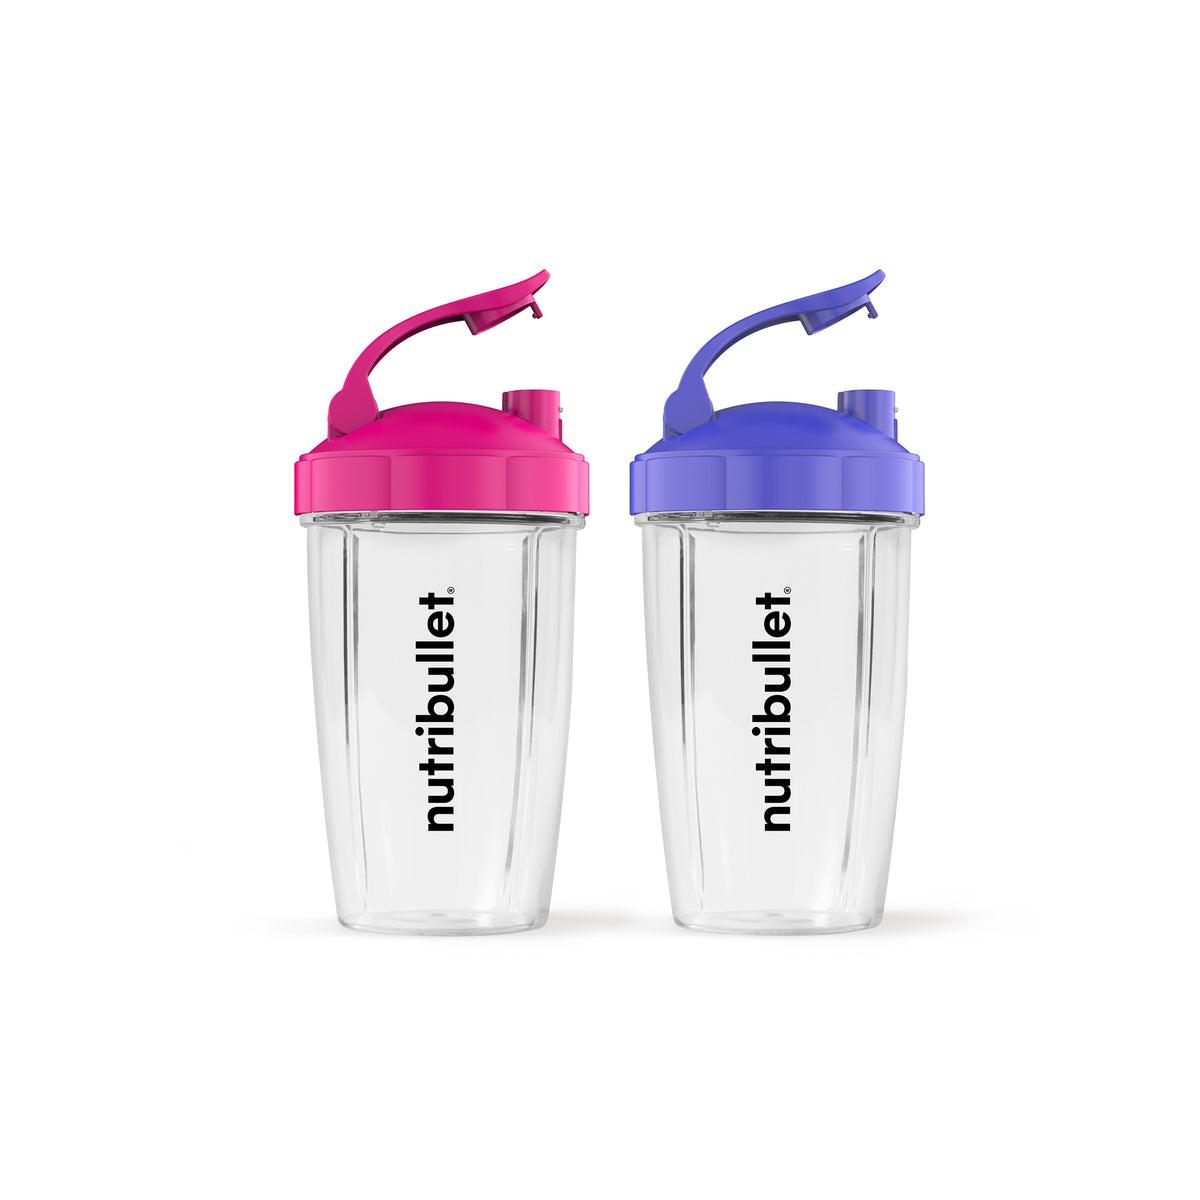 Nutribullet Smoothie To-Go Portable Cups